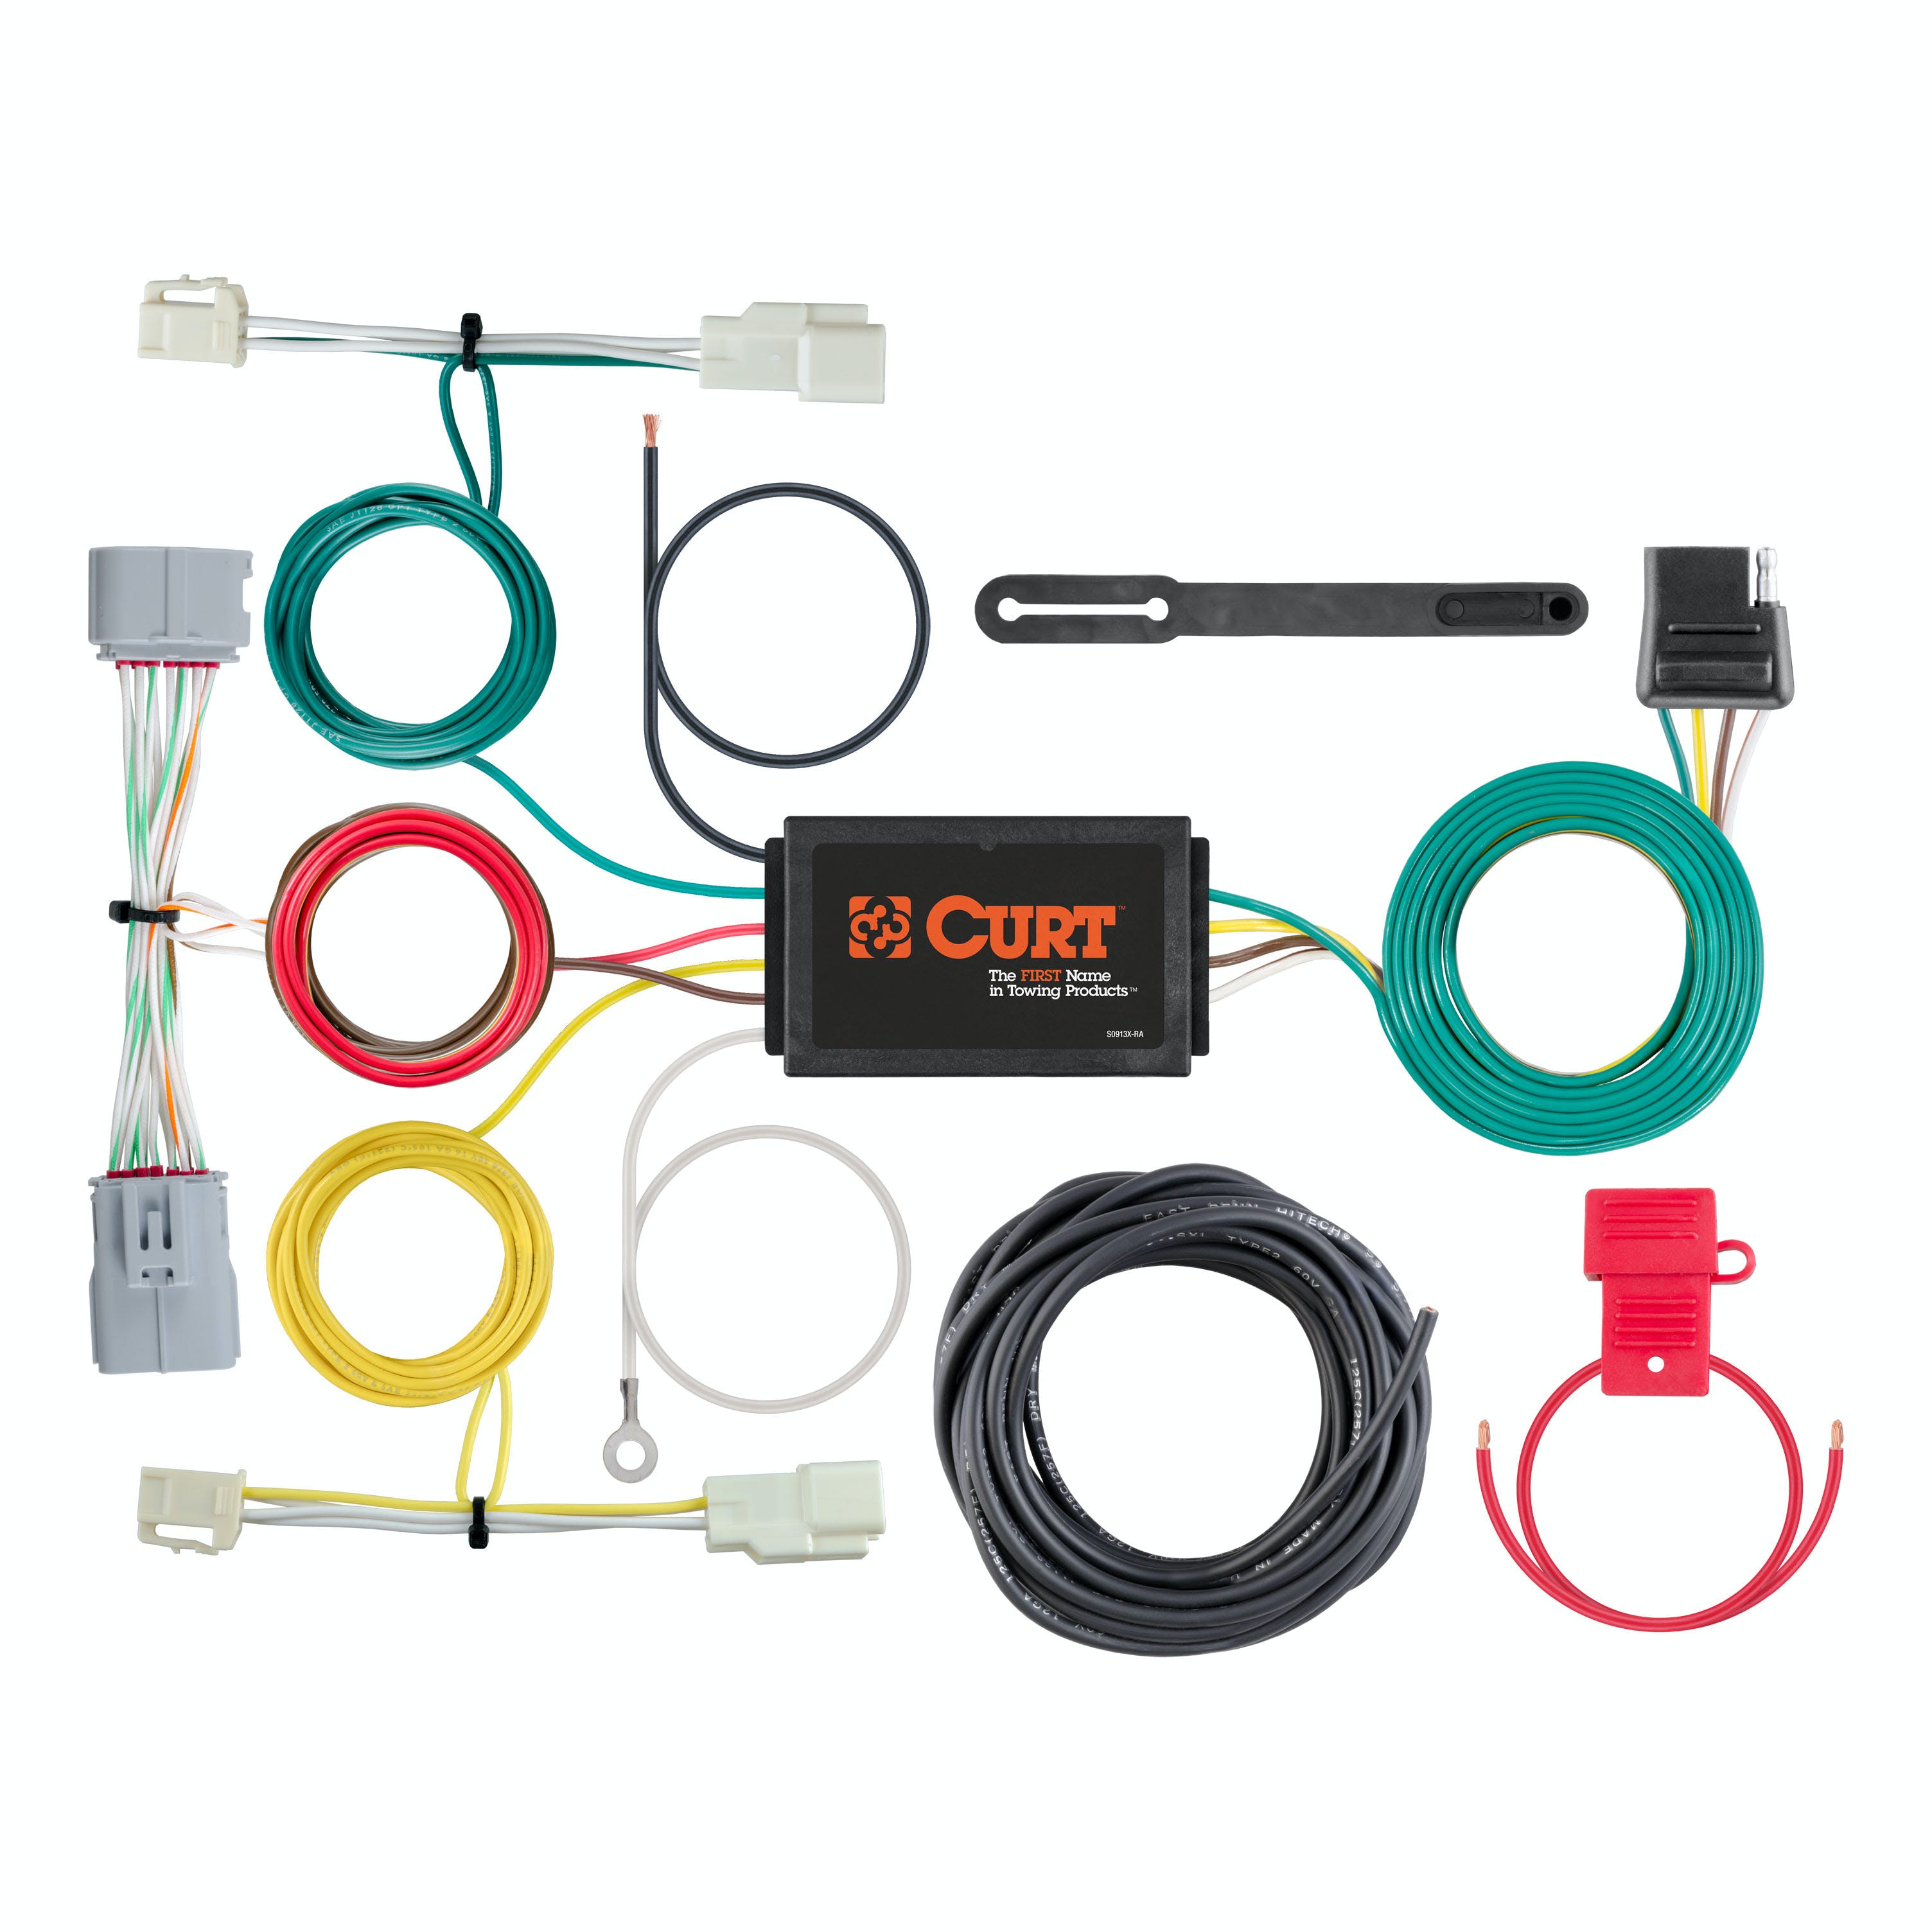 CURT 56353 Custom Wiring Harness, 4-Way Flat Output, Select Toyota Prius